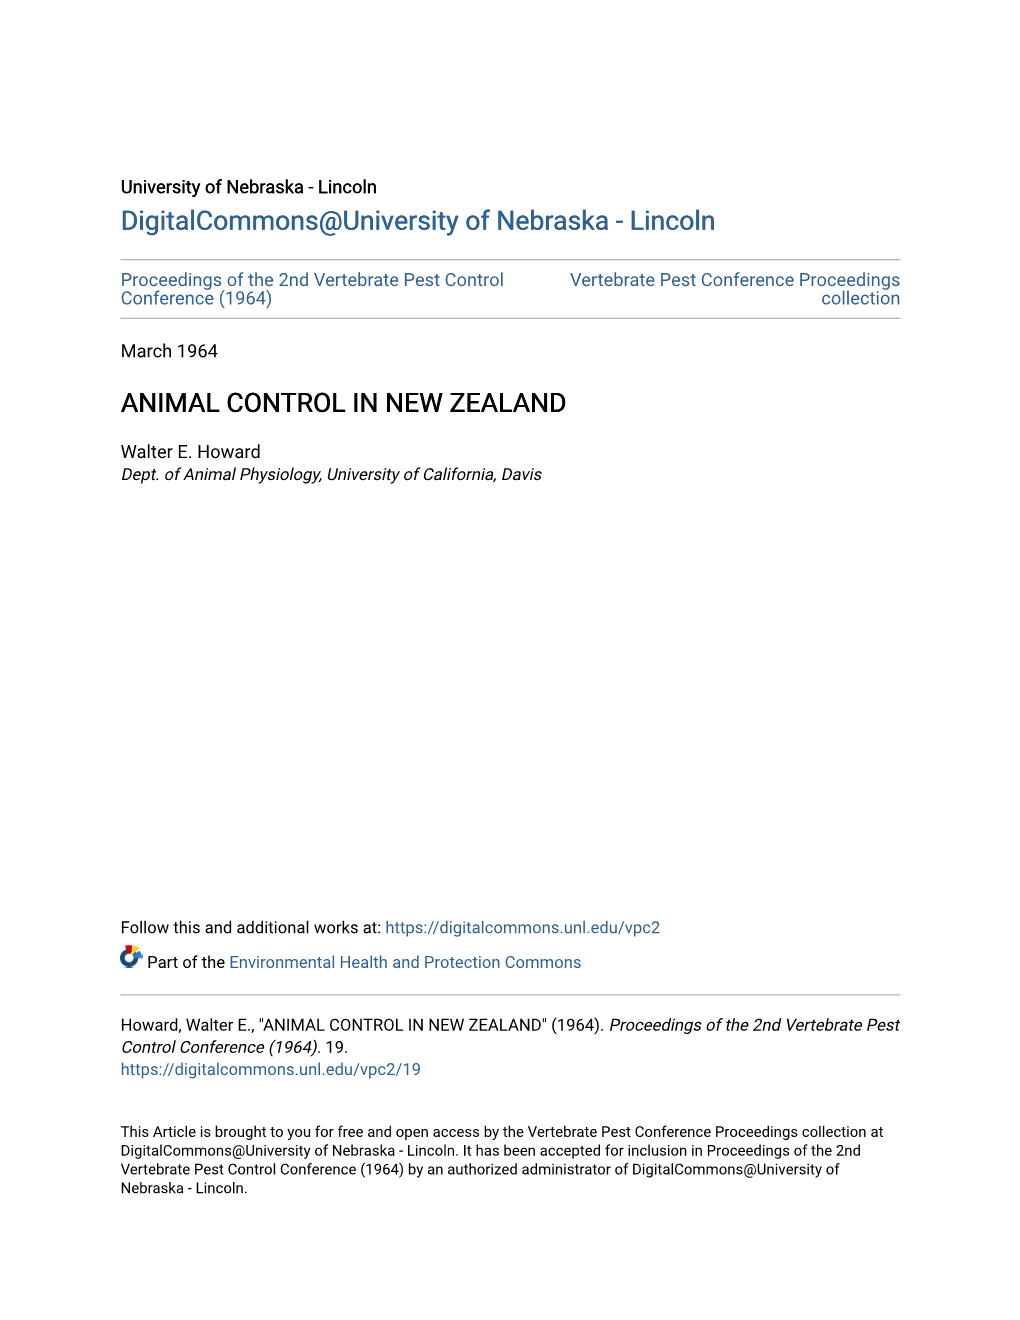 Animal Control in New Zealand